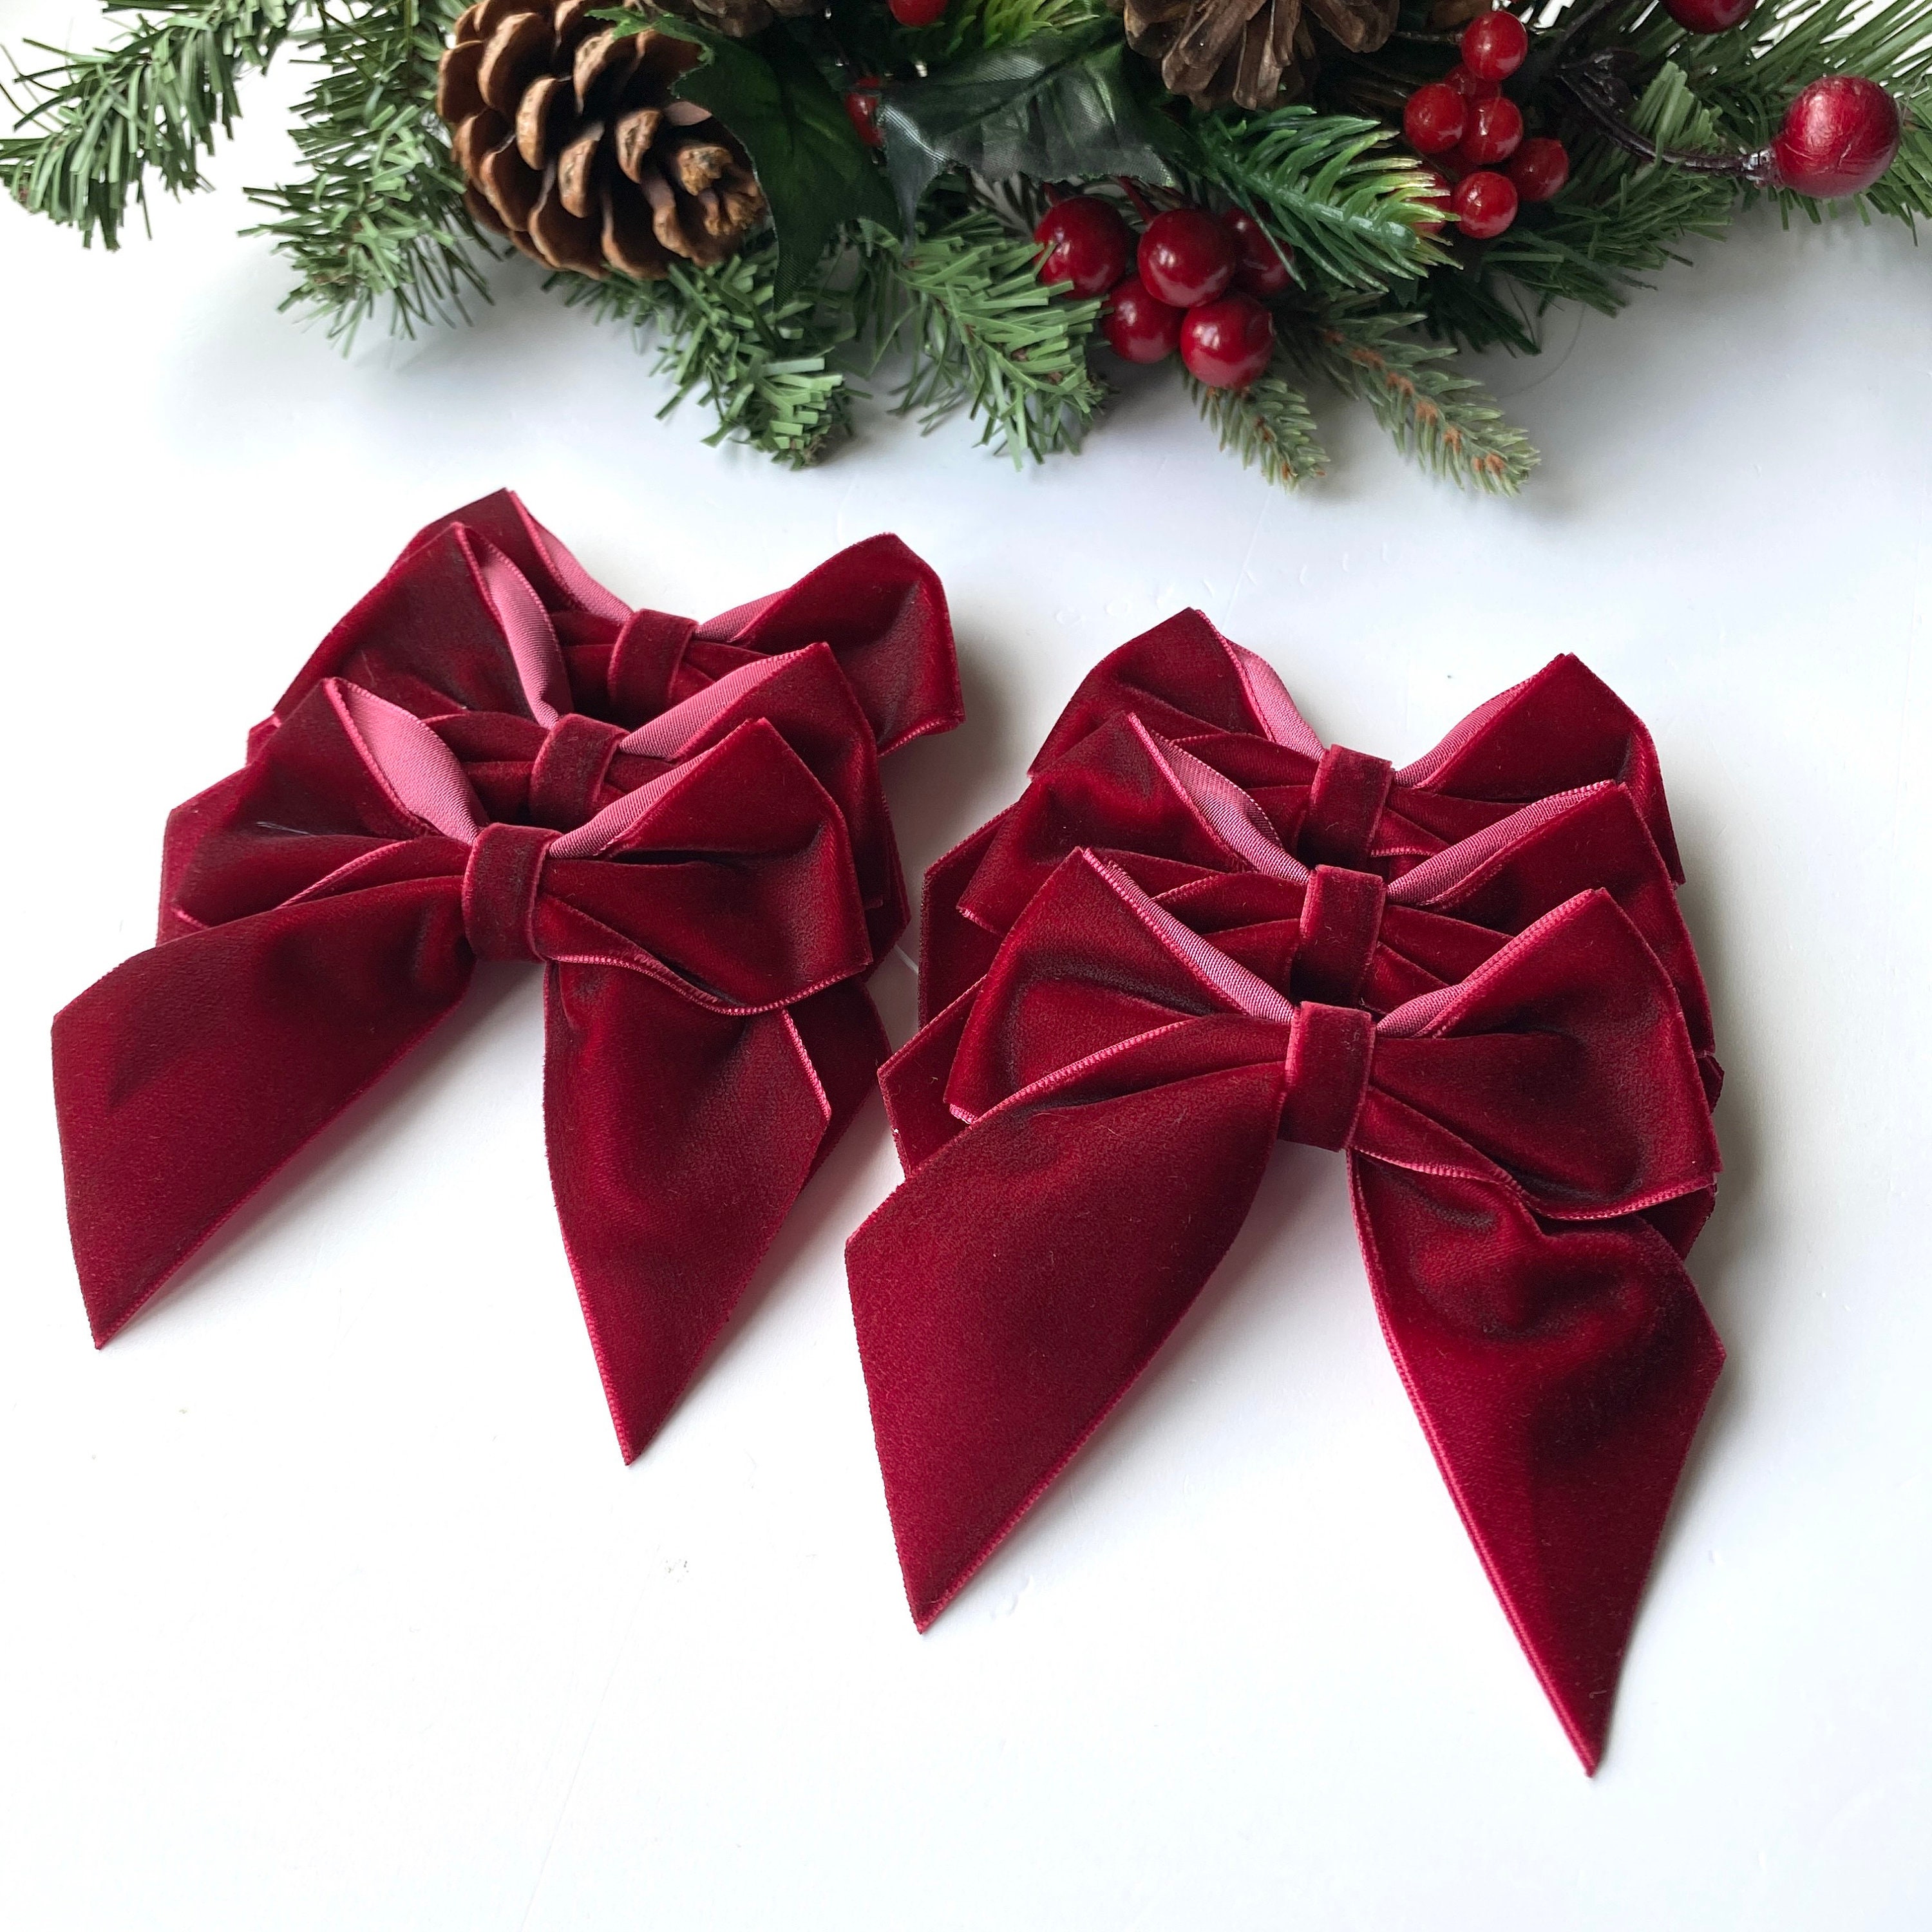 Zoe Deco Big Car Bow (Red, 23 inch), Giant Birthday Bow, Huge Car Bow, Big  Red Bow, Bow for Gifts, Christmas Bows for Cars, Gift Wrapping, Big Gift